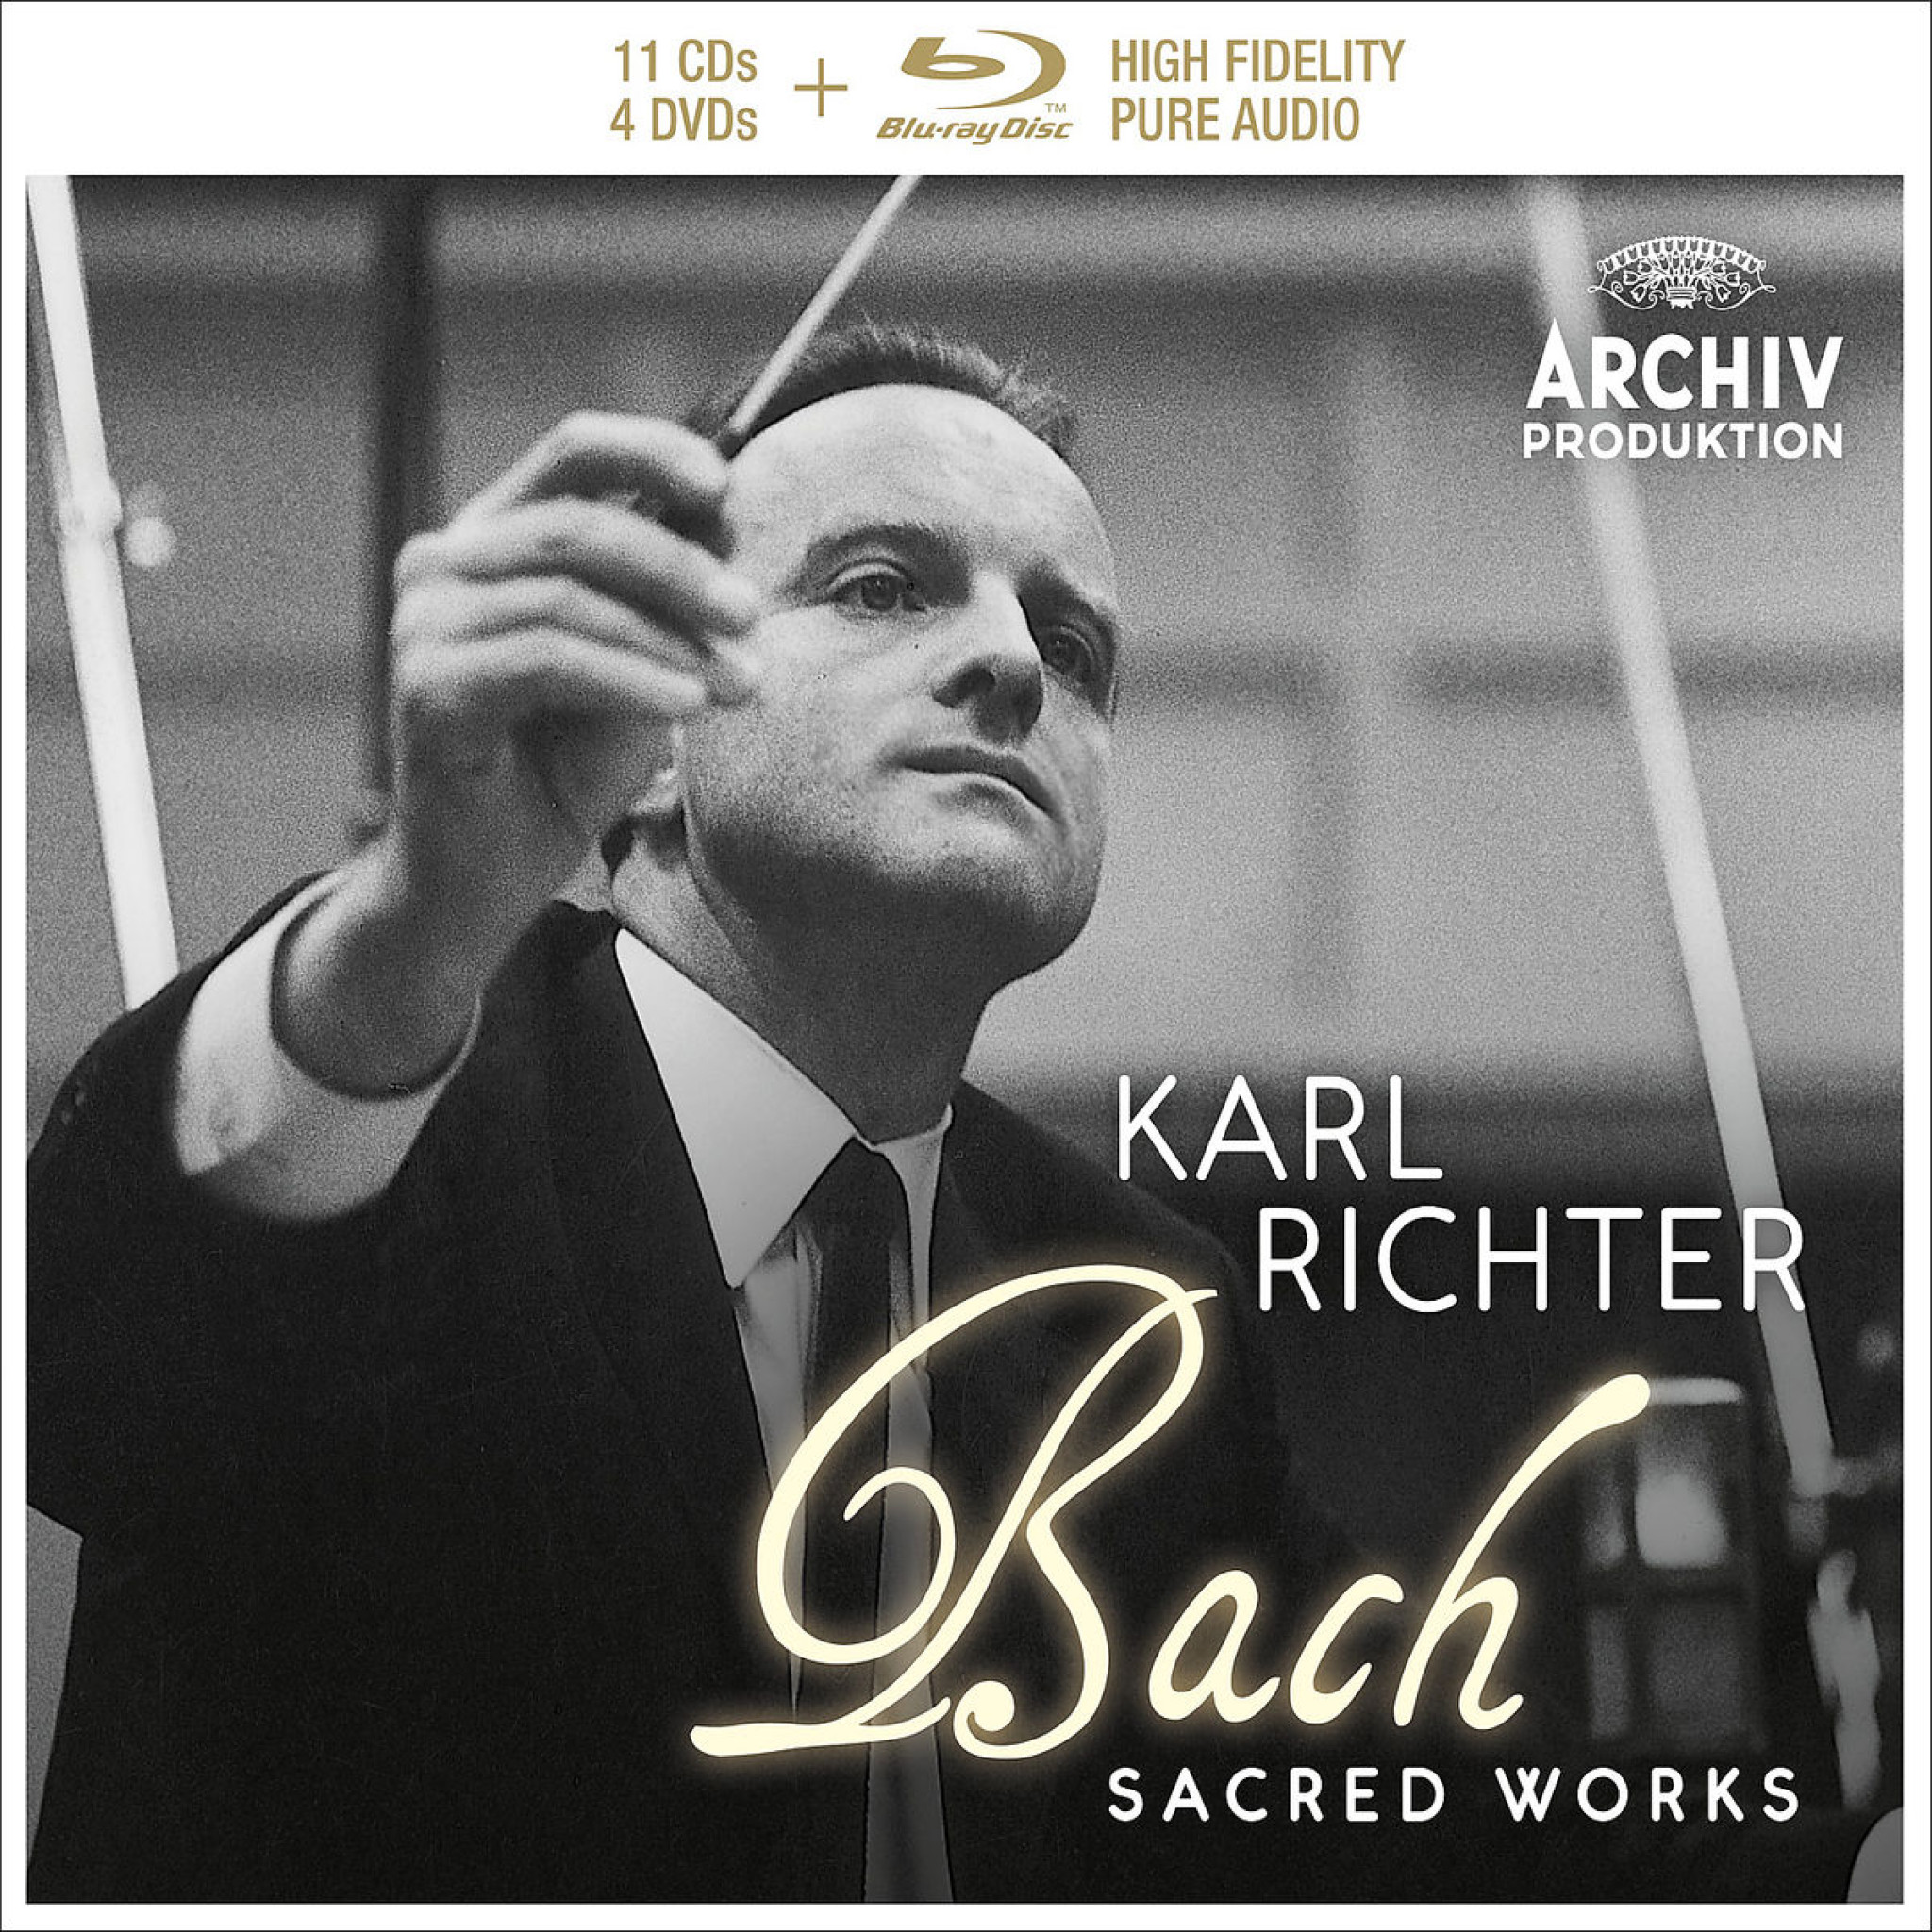 J.S. Bach - Sacred Works Deluxe